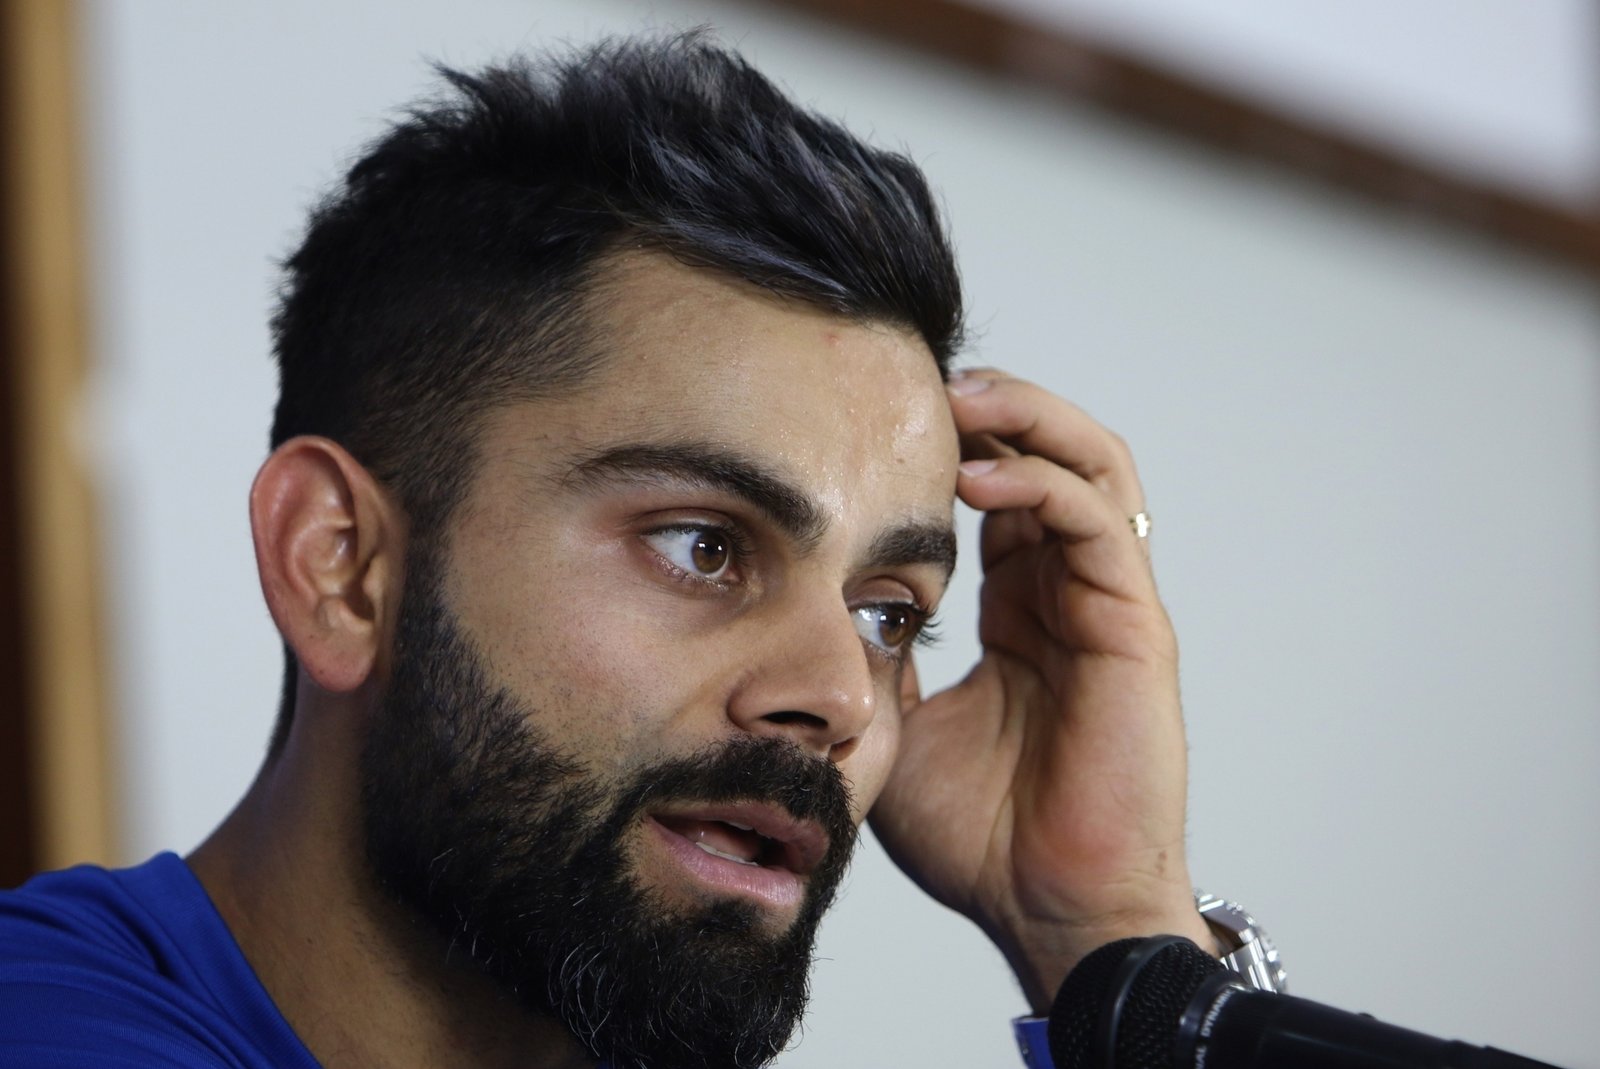 World Cup team will be sorted out before IPL, says Kohli - ReportOdisha.com